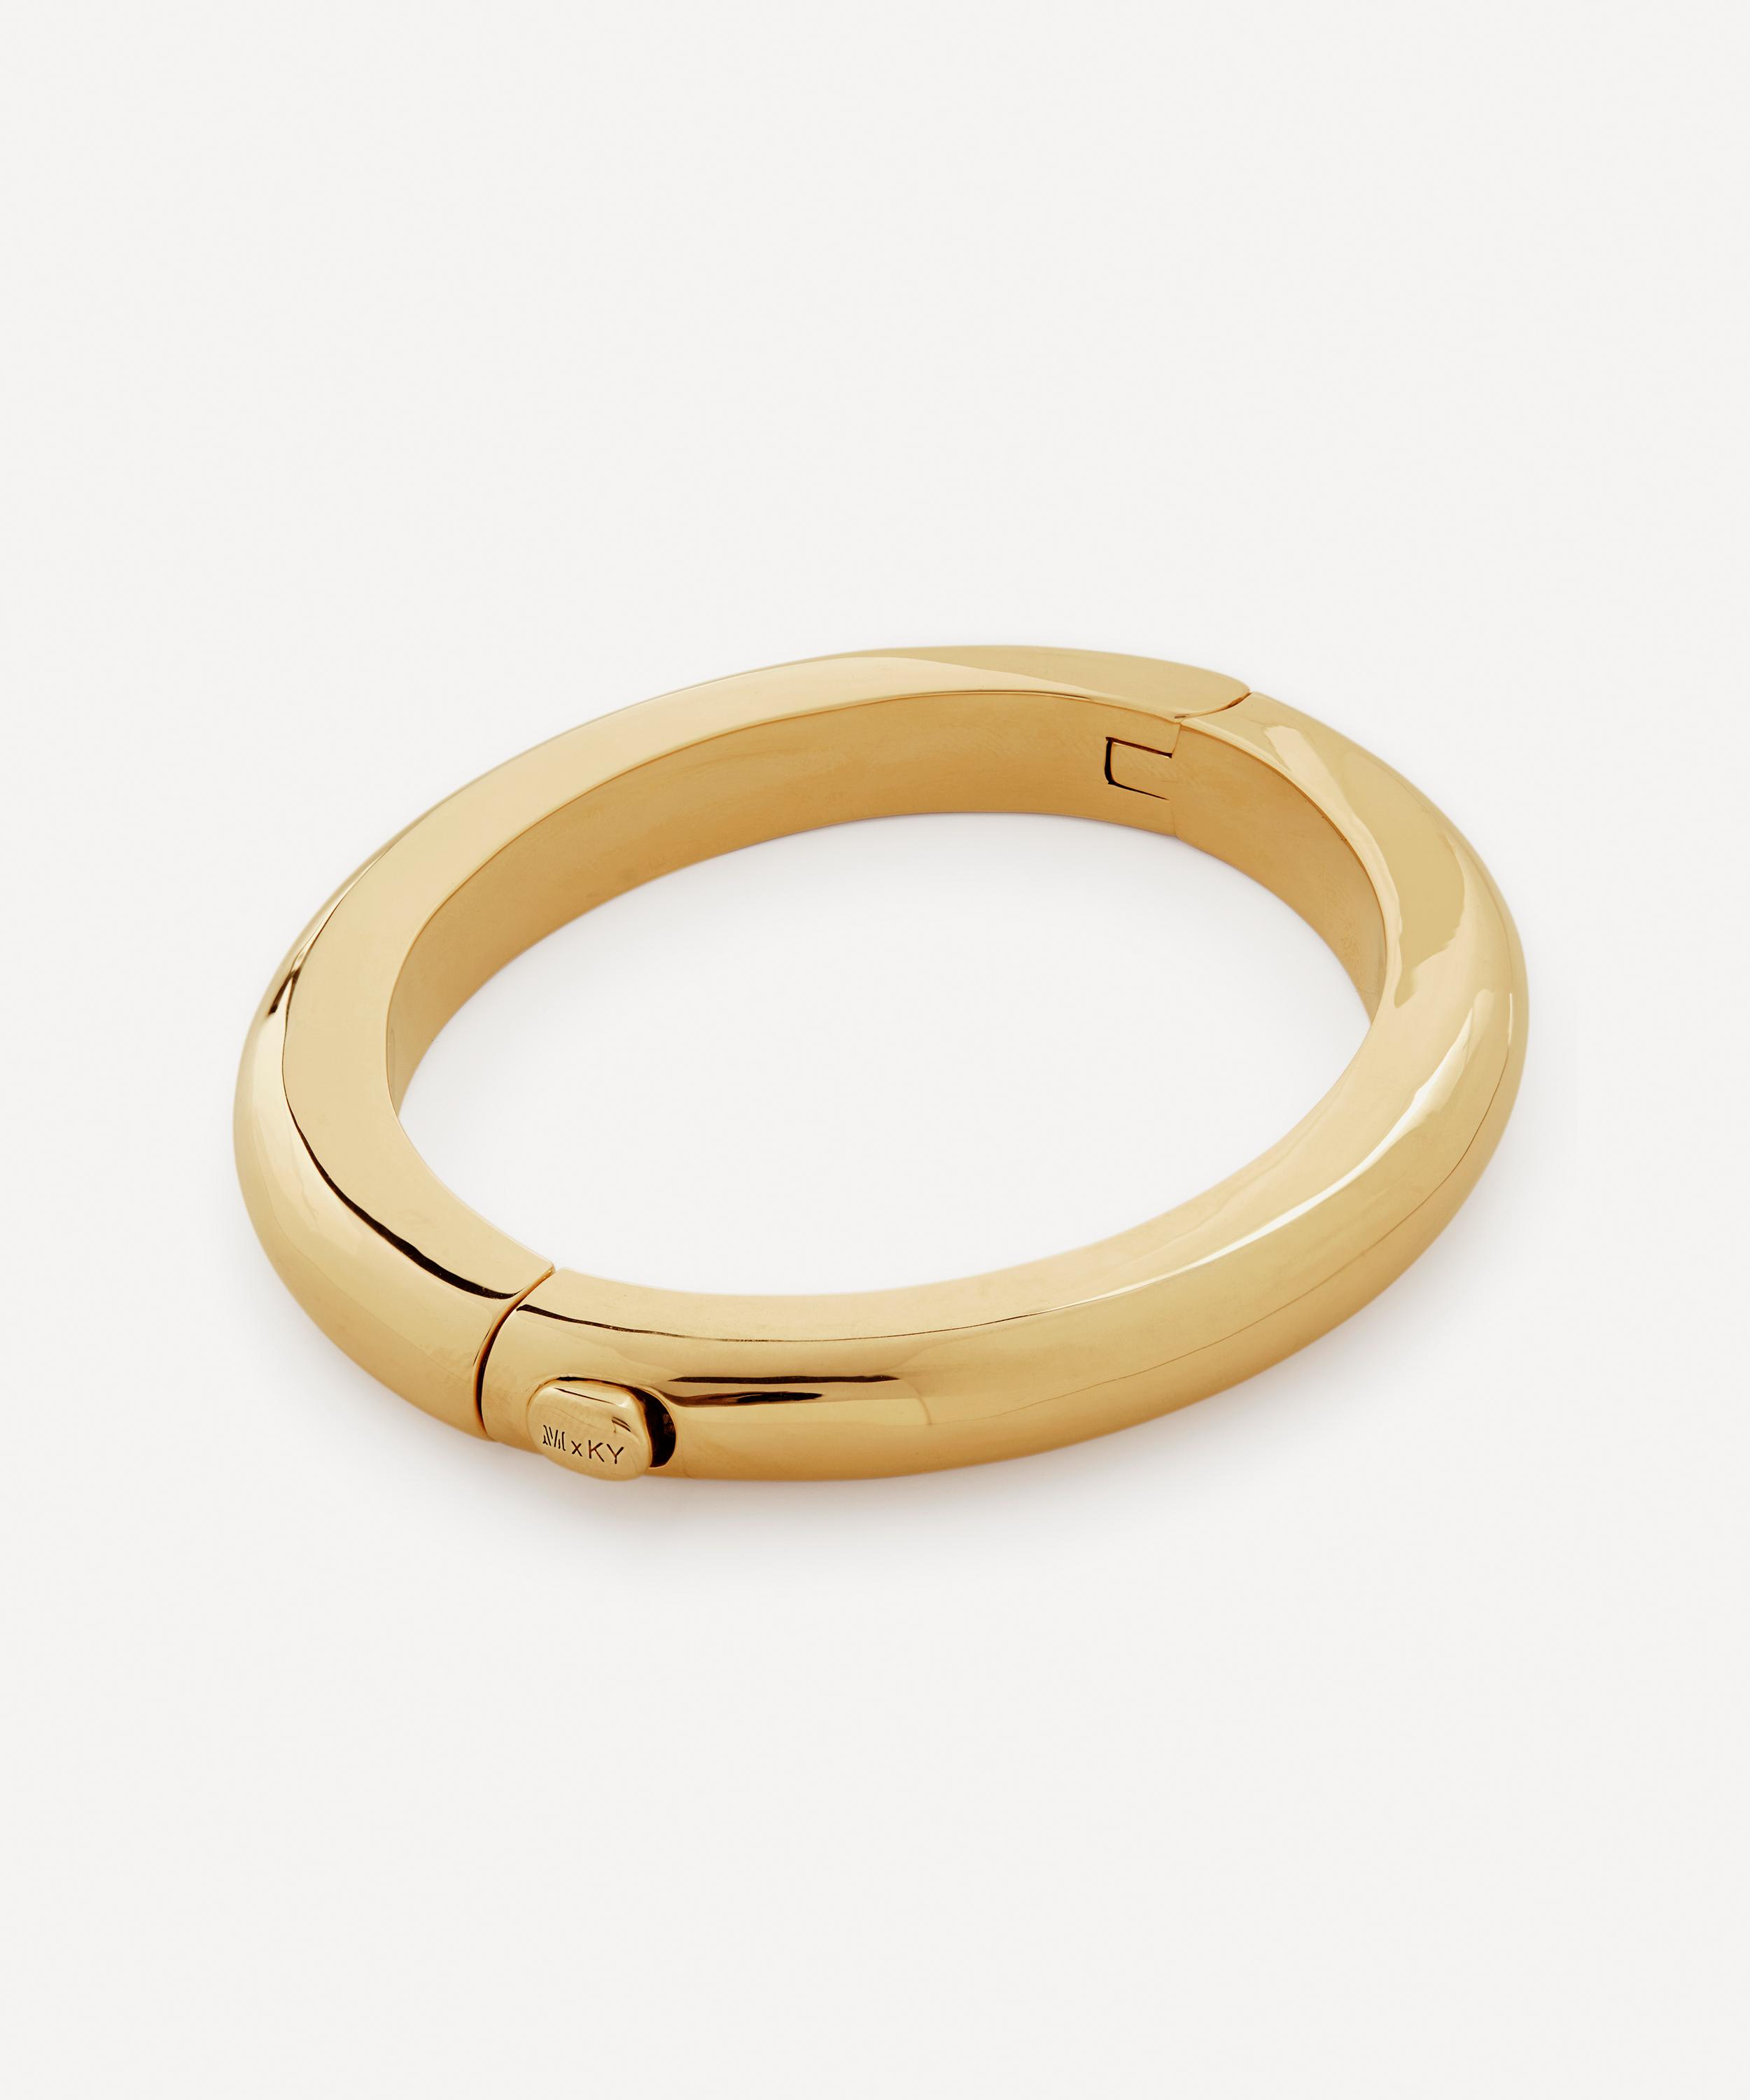 MONICA VINADER X KATE YOUNG 18CT GOLD-PLATED VERMEIL SILVER BANGLE BRACELET